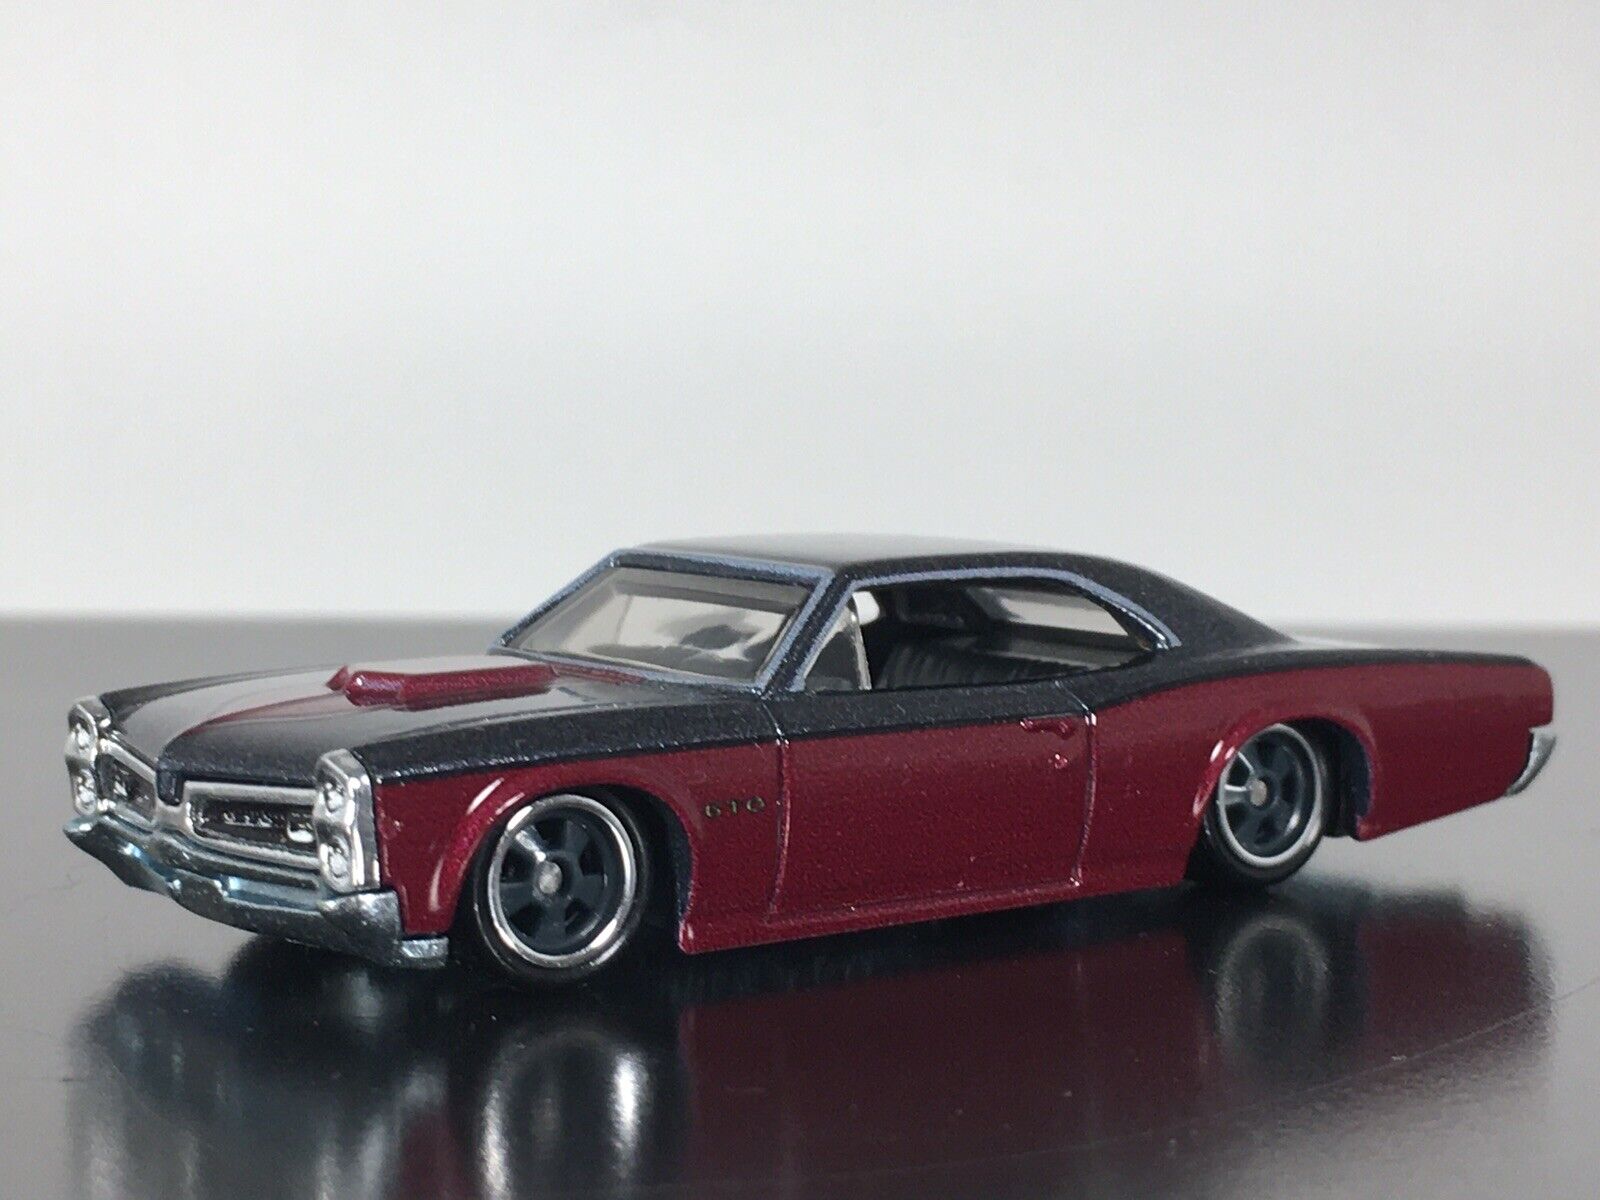 1966 66 PONTIAC GTO 1:64 SCALE COLLECTIBLE  LIMITED DIORAMA DIECAST MODEL CAR